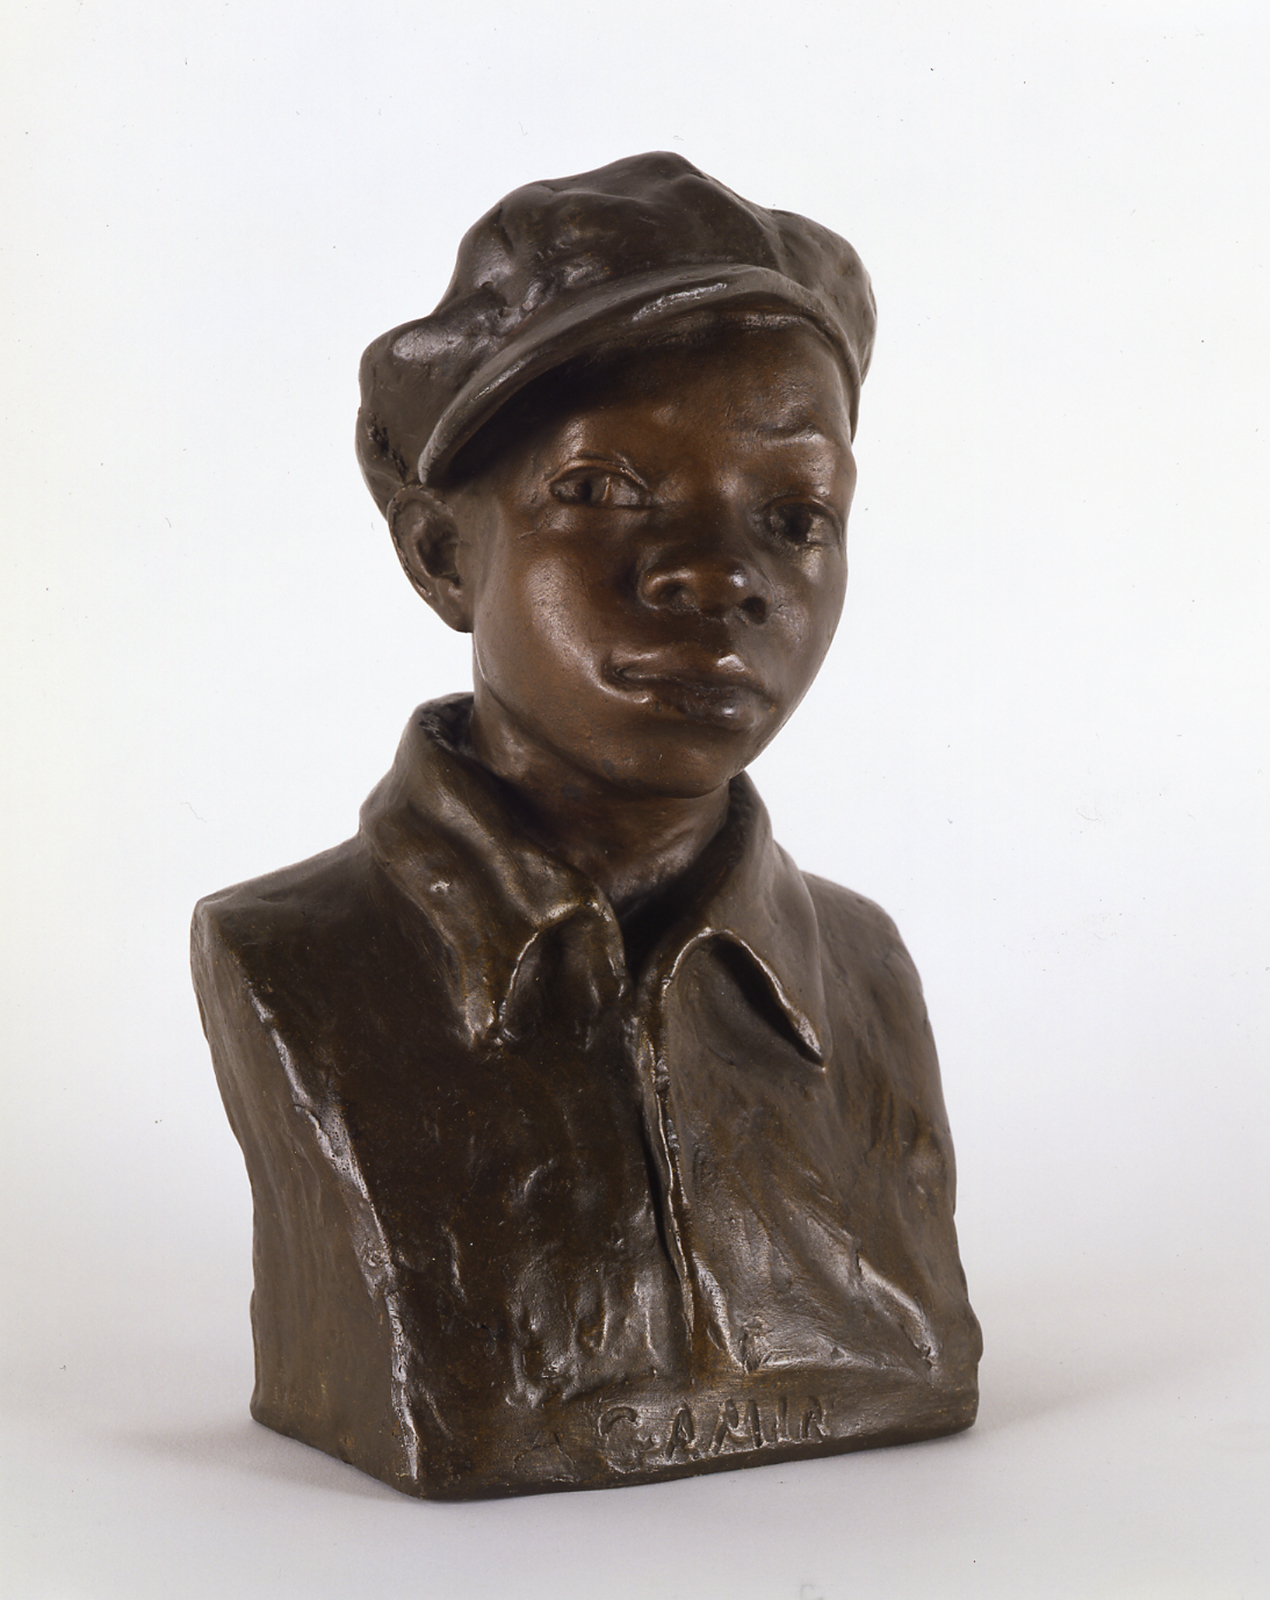 Augusta Savage, Gamin, c. 1930, painted plaster, 9¼ x 6 x 4 inches. The Cummer Museum of Art & Gardens, Jacksonville, Florida. Purchased with funds from the Morton R. Hirschberg Bequest, AP.2013.1.1